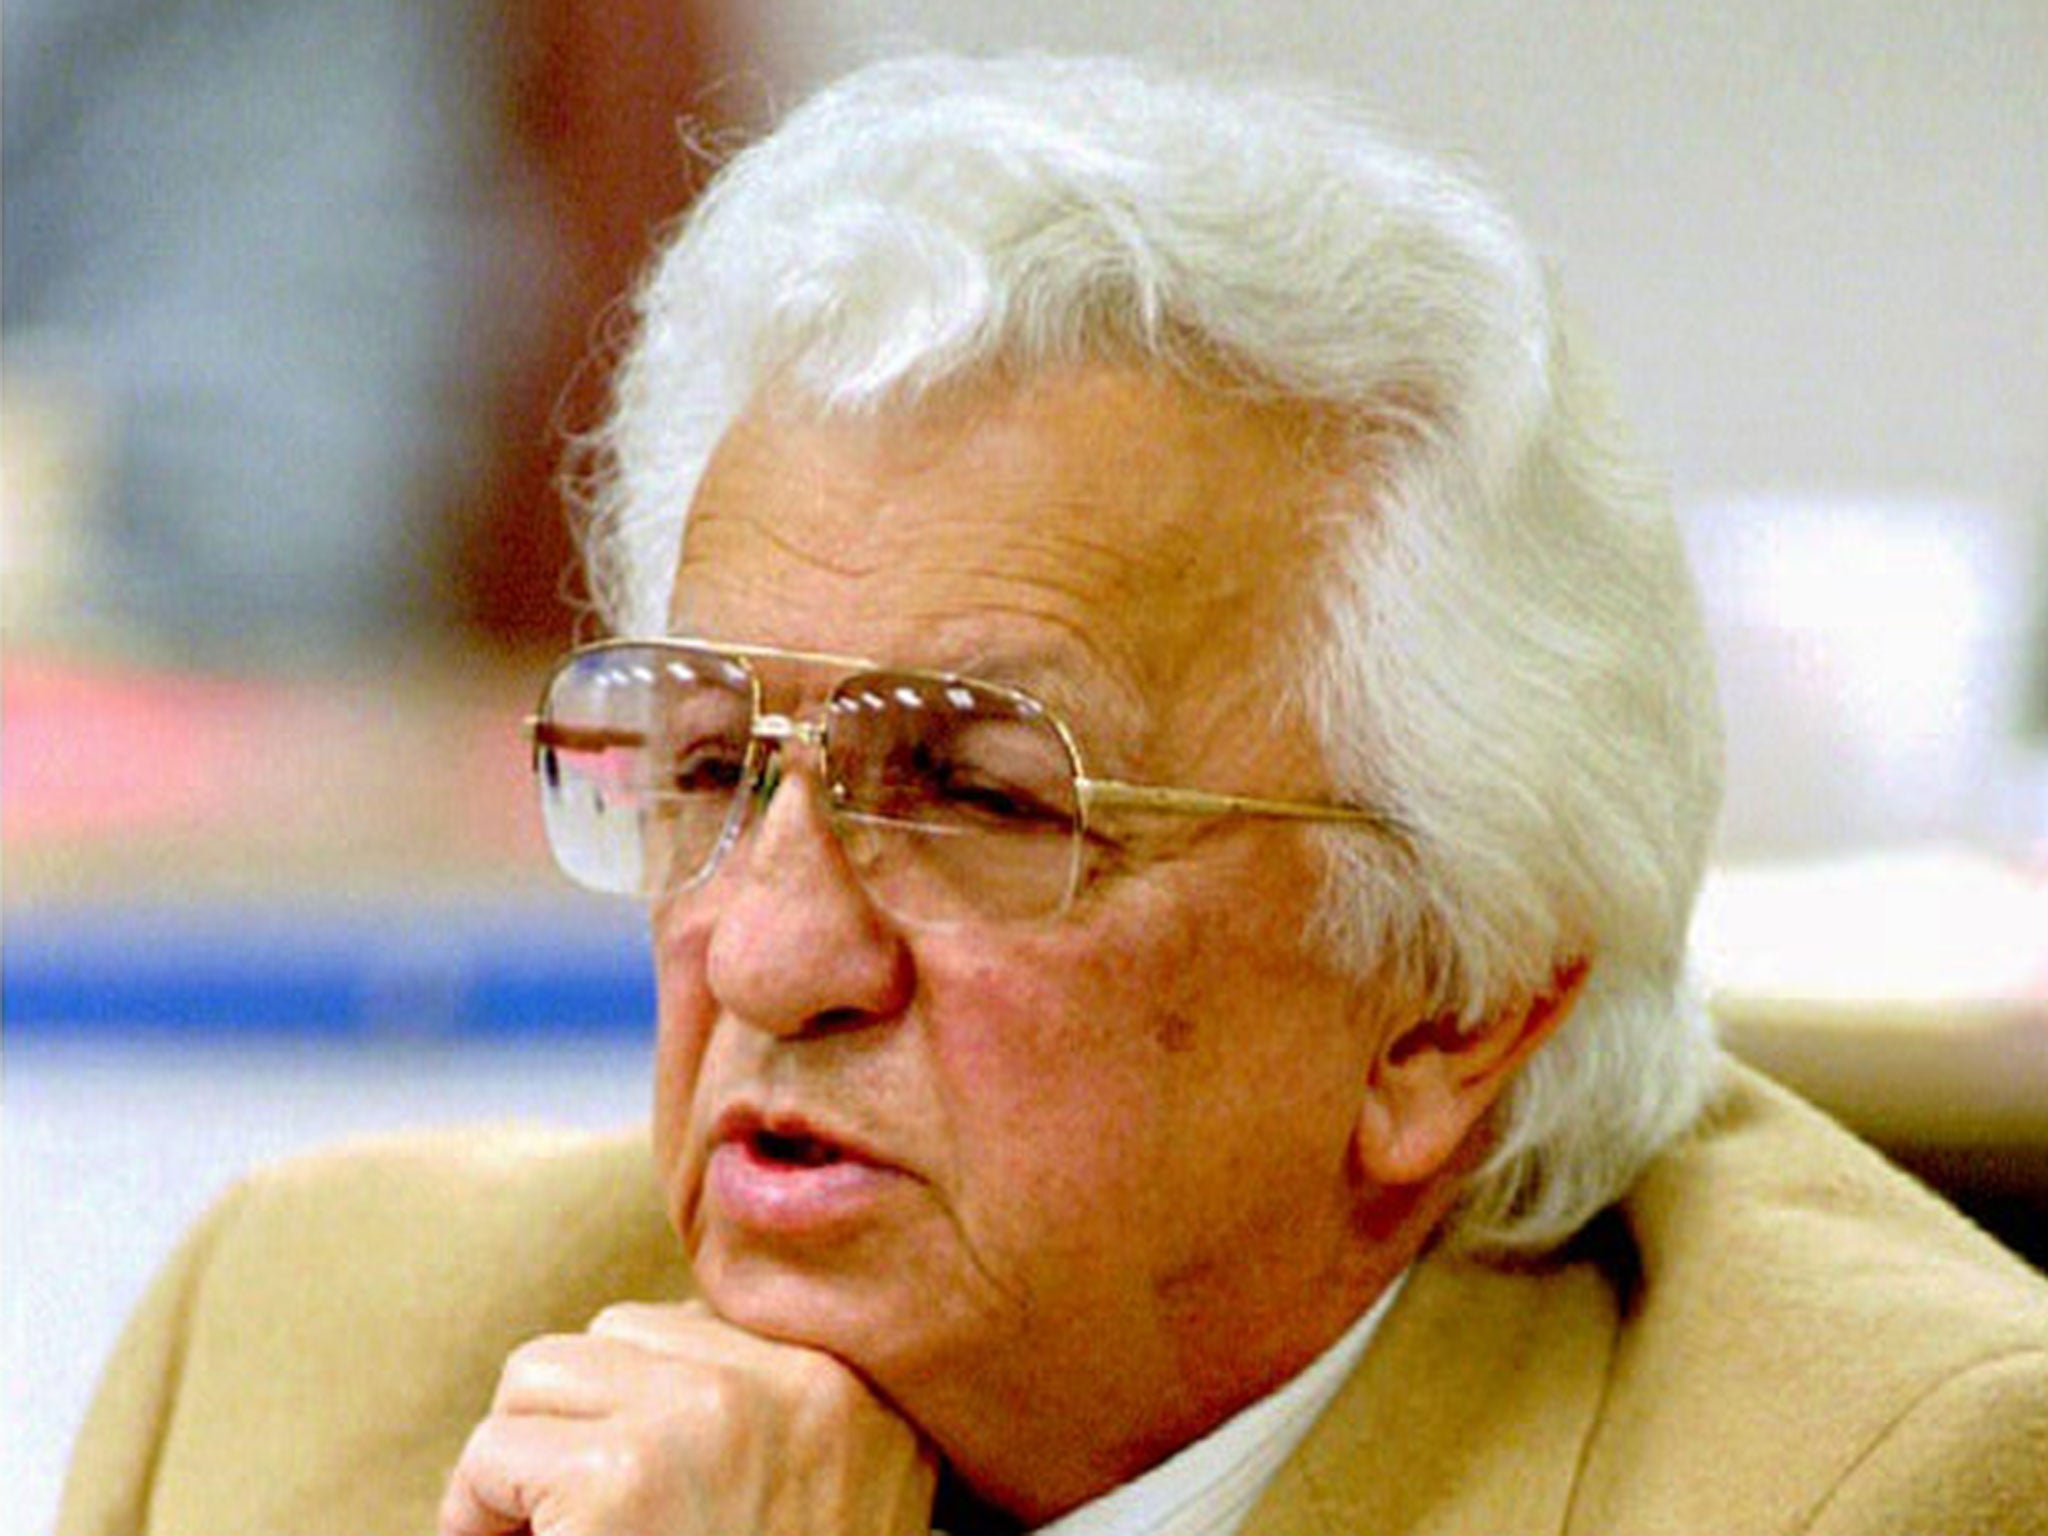 Nichopoulos in 1993 at one of the hearings that led to his being disbarred